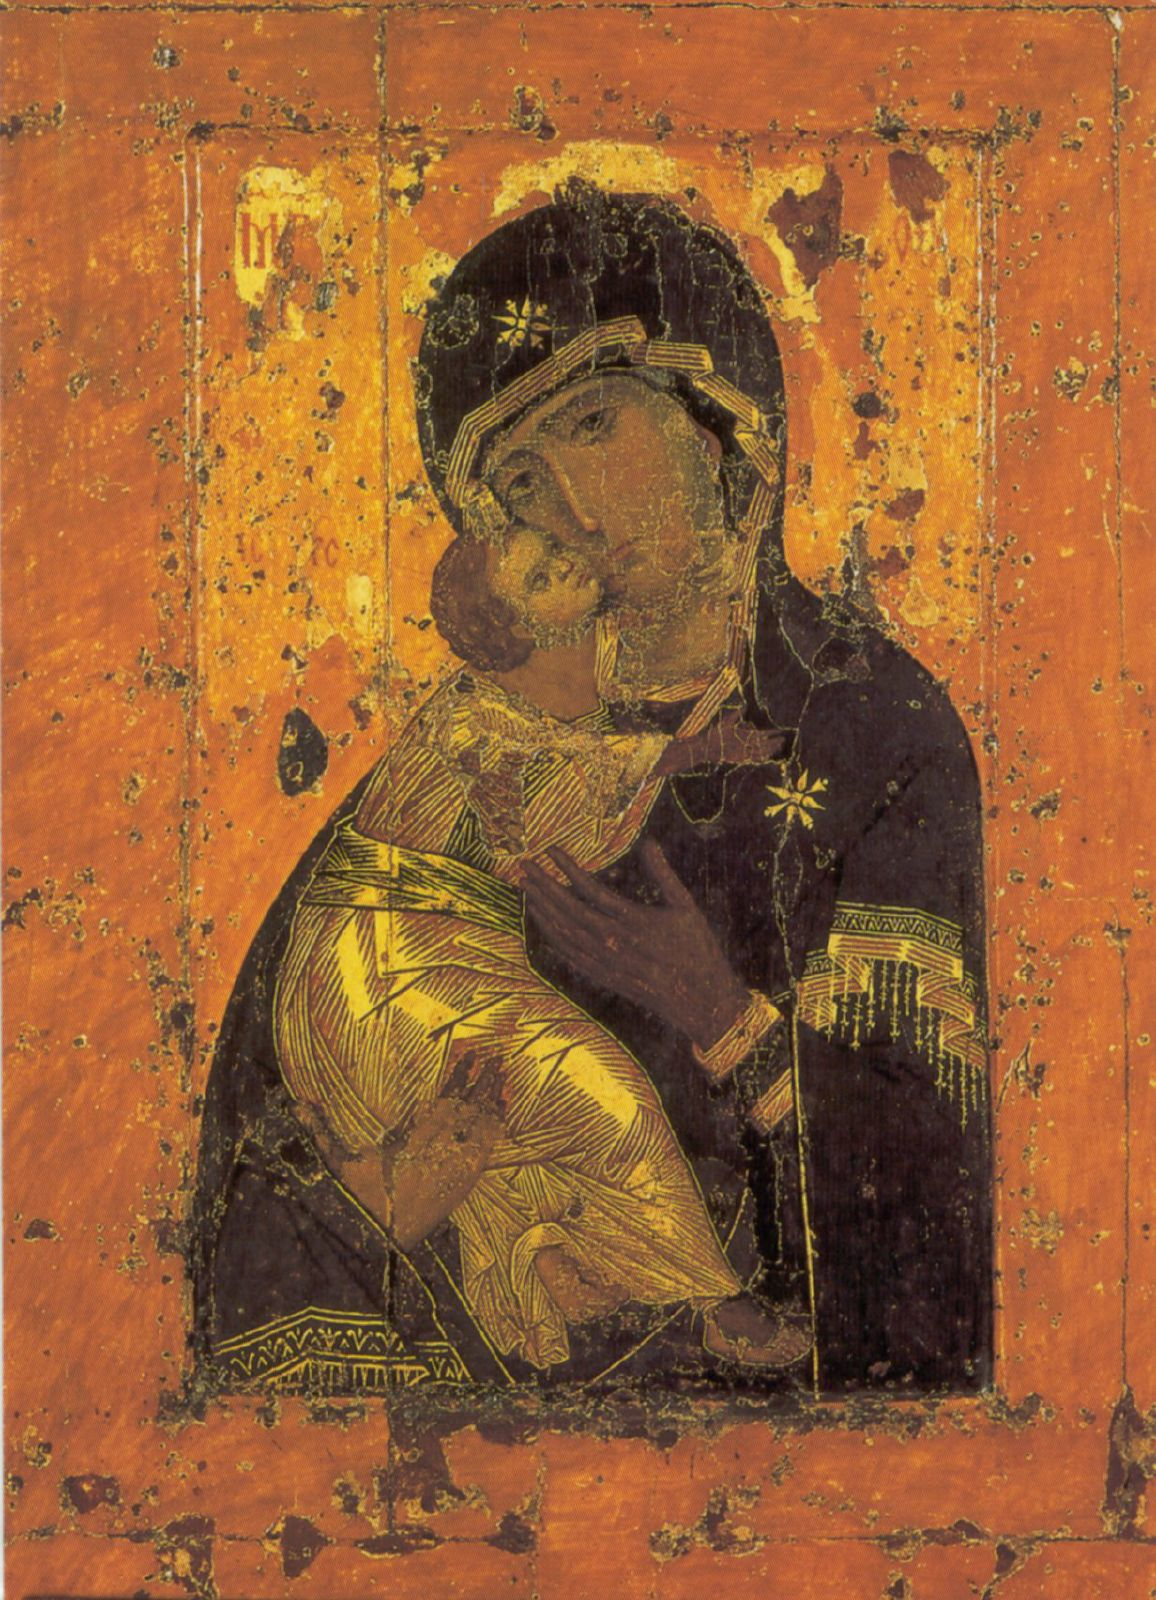 Our Lady of Vladimir, Photographed by Jim Forest.